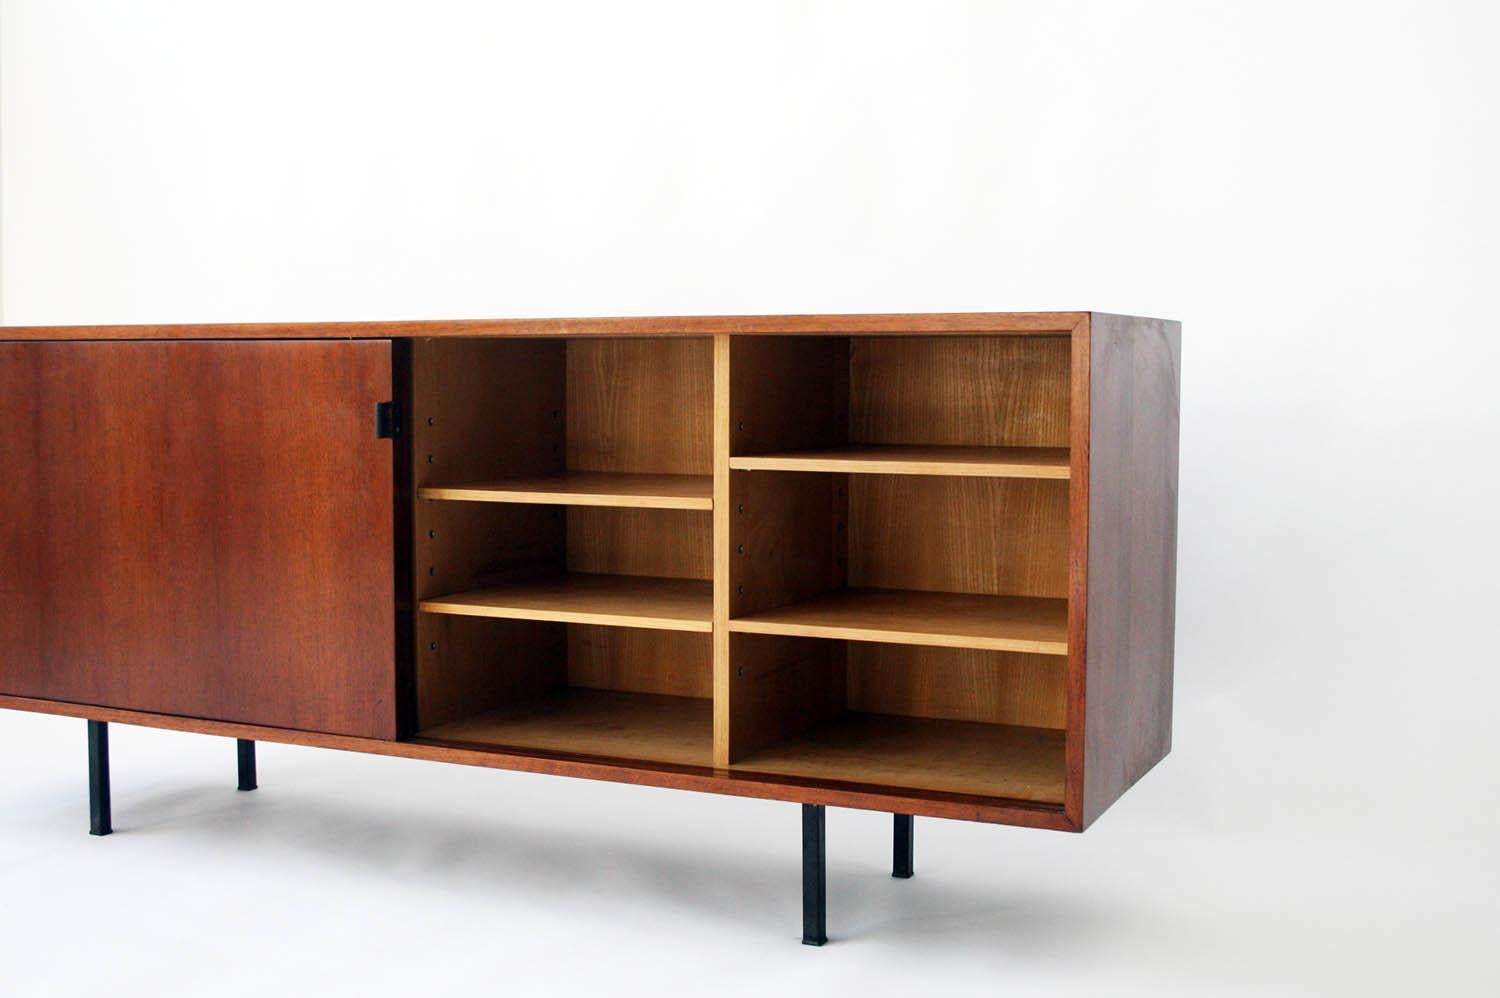 20th Century Early Walnut Credenza by Florence Knoll for Knoll